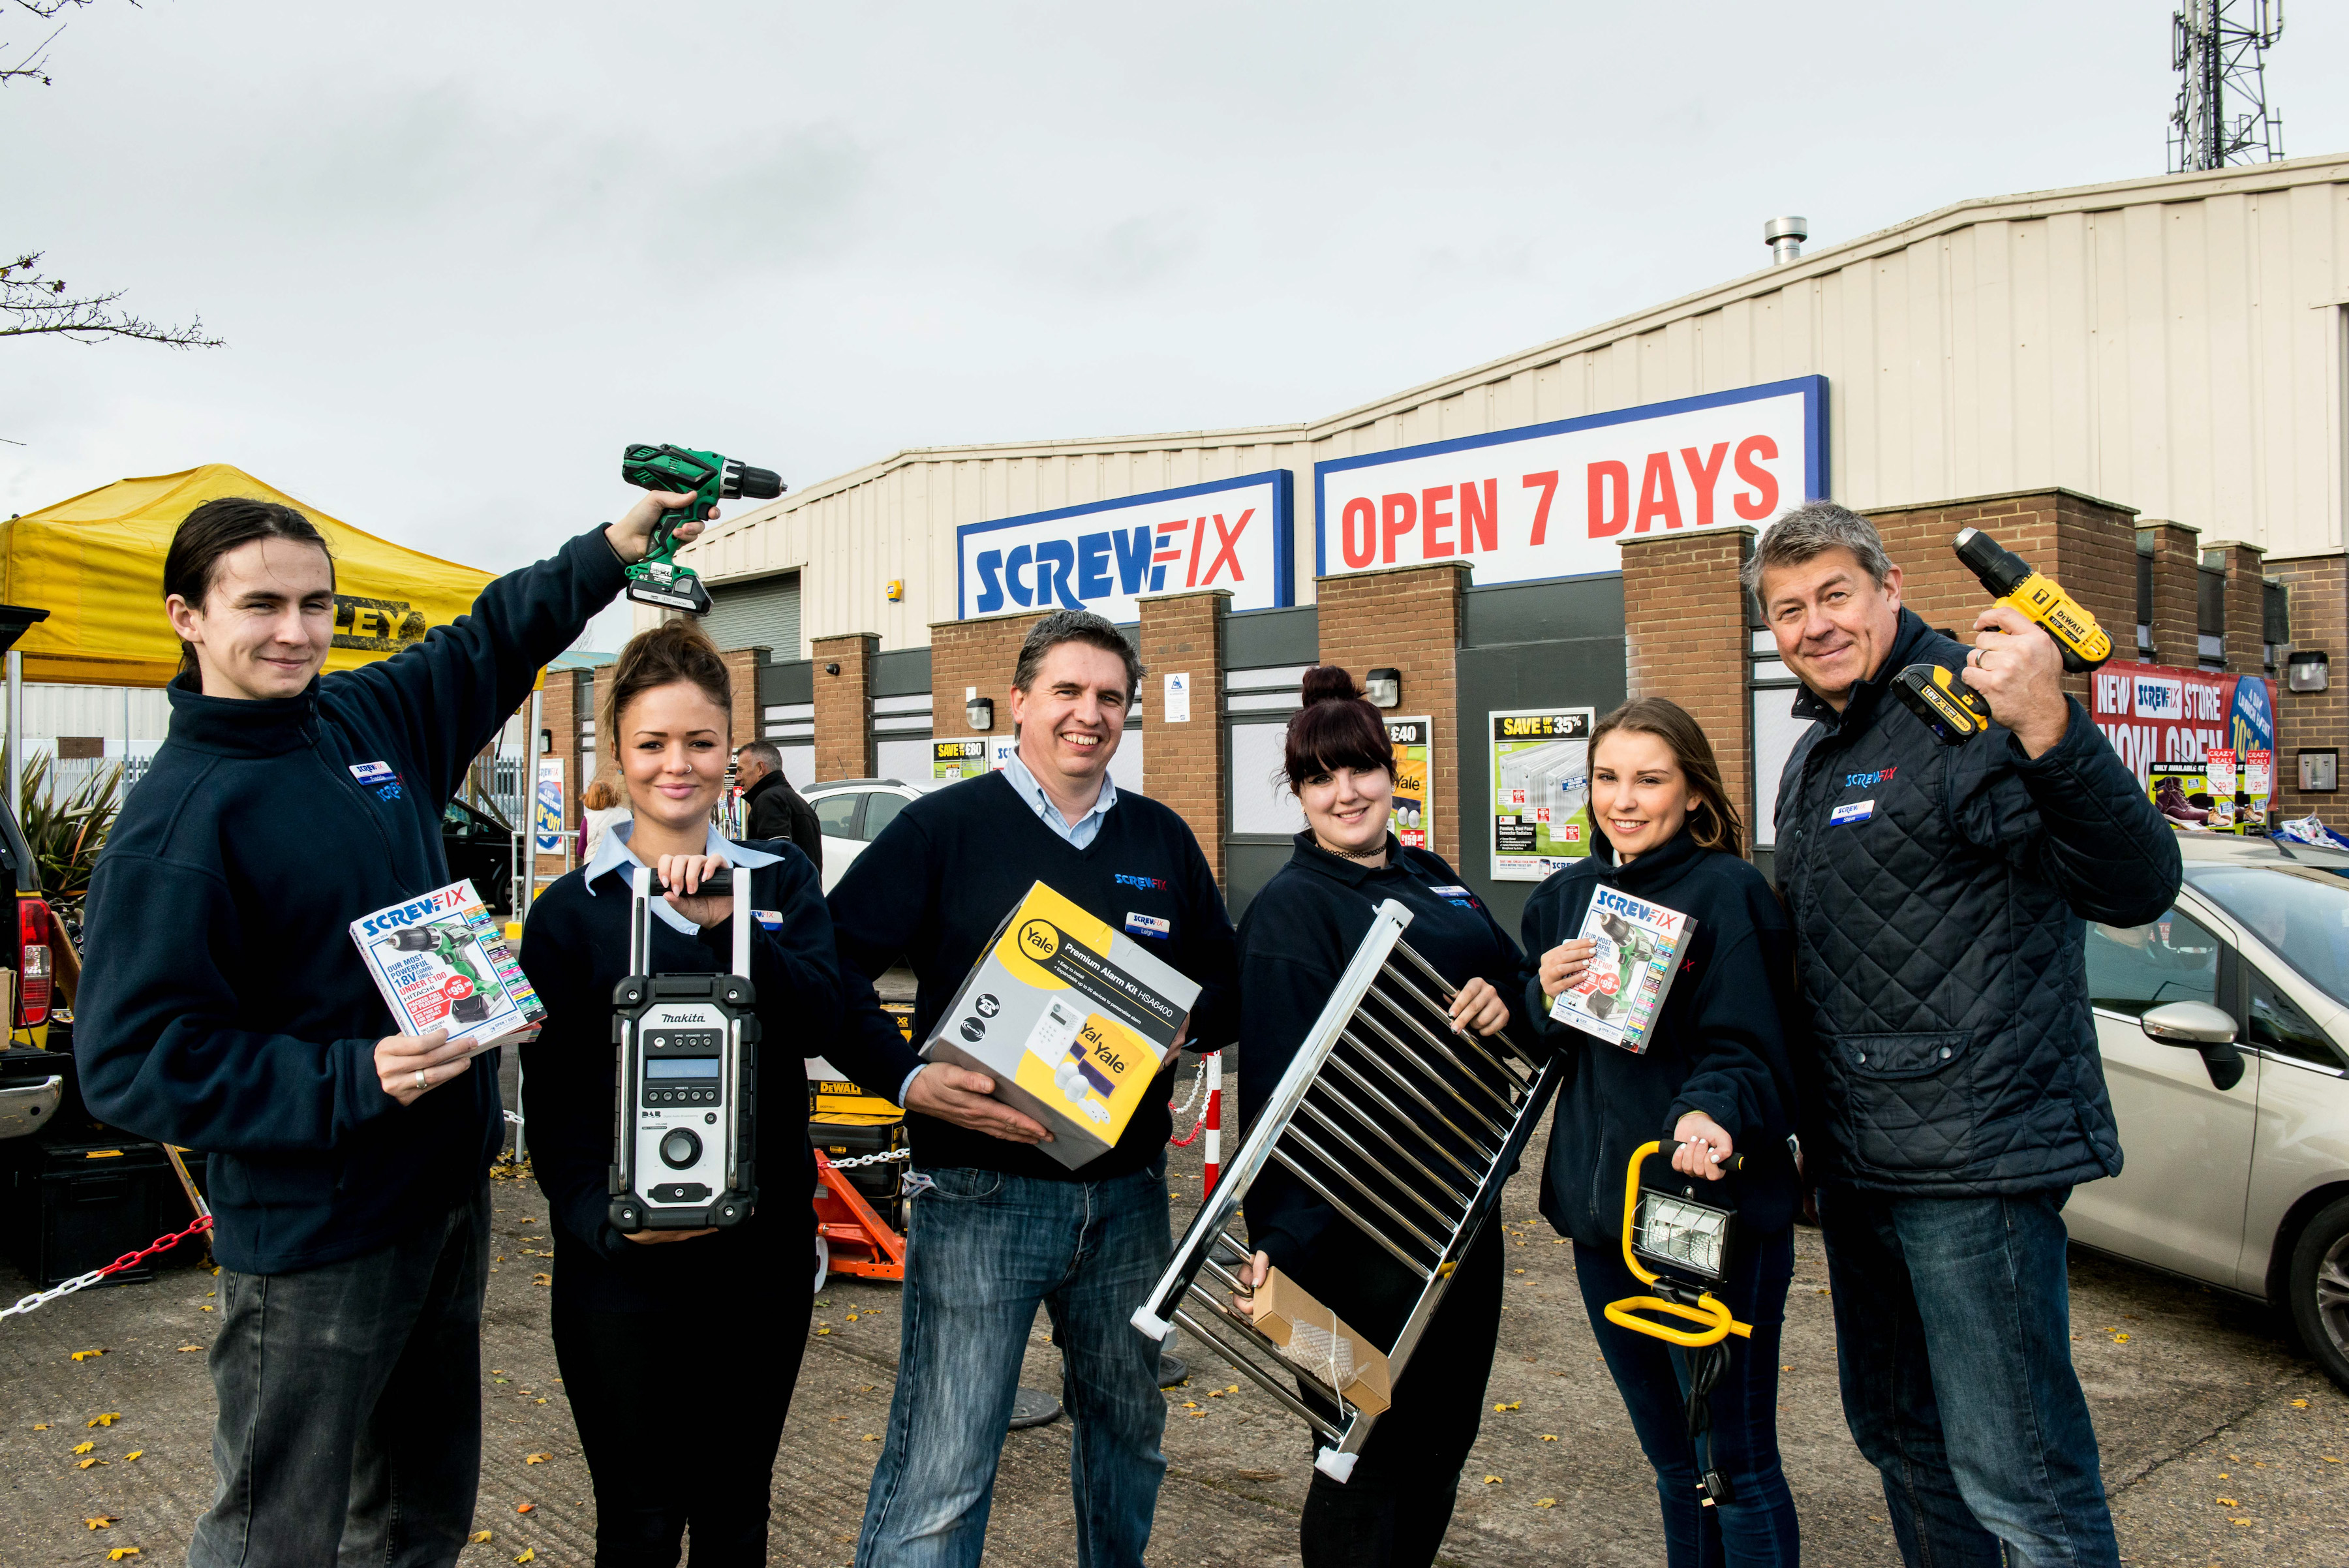 Broadstairs’ first Screwfix store is declared a runaway success